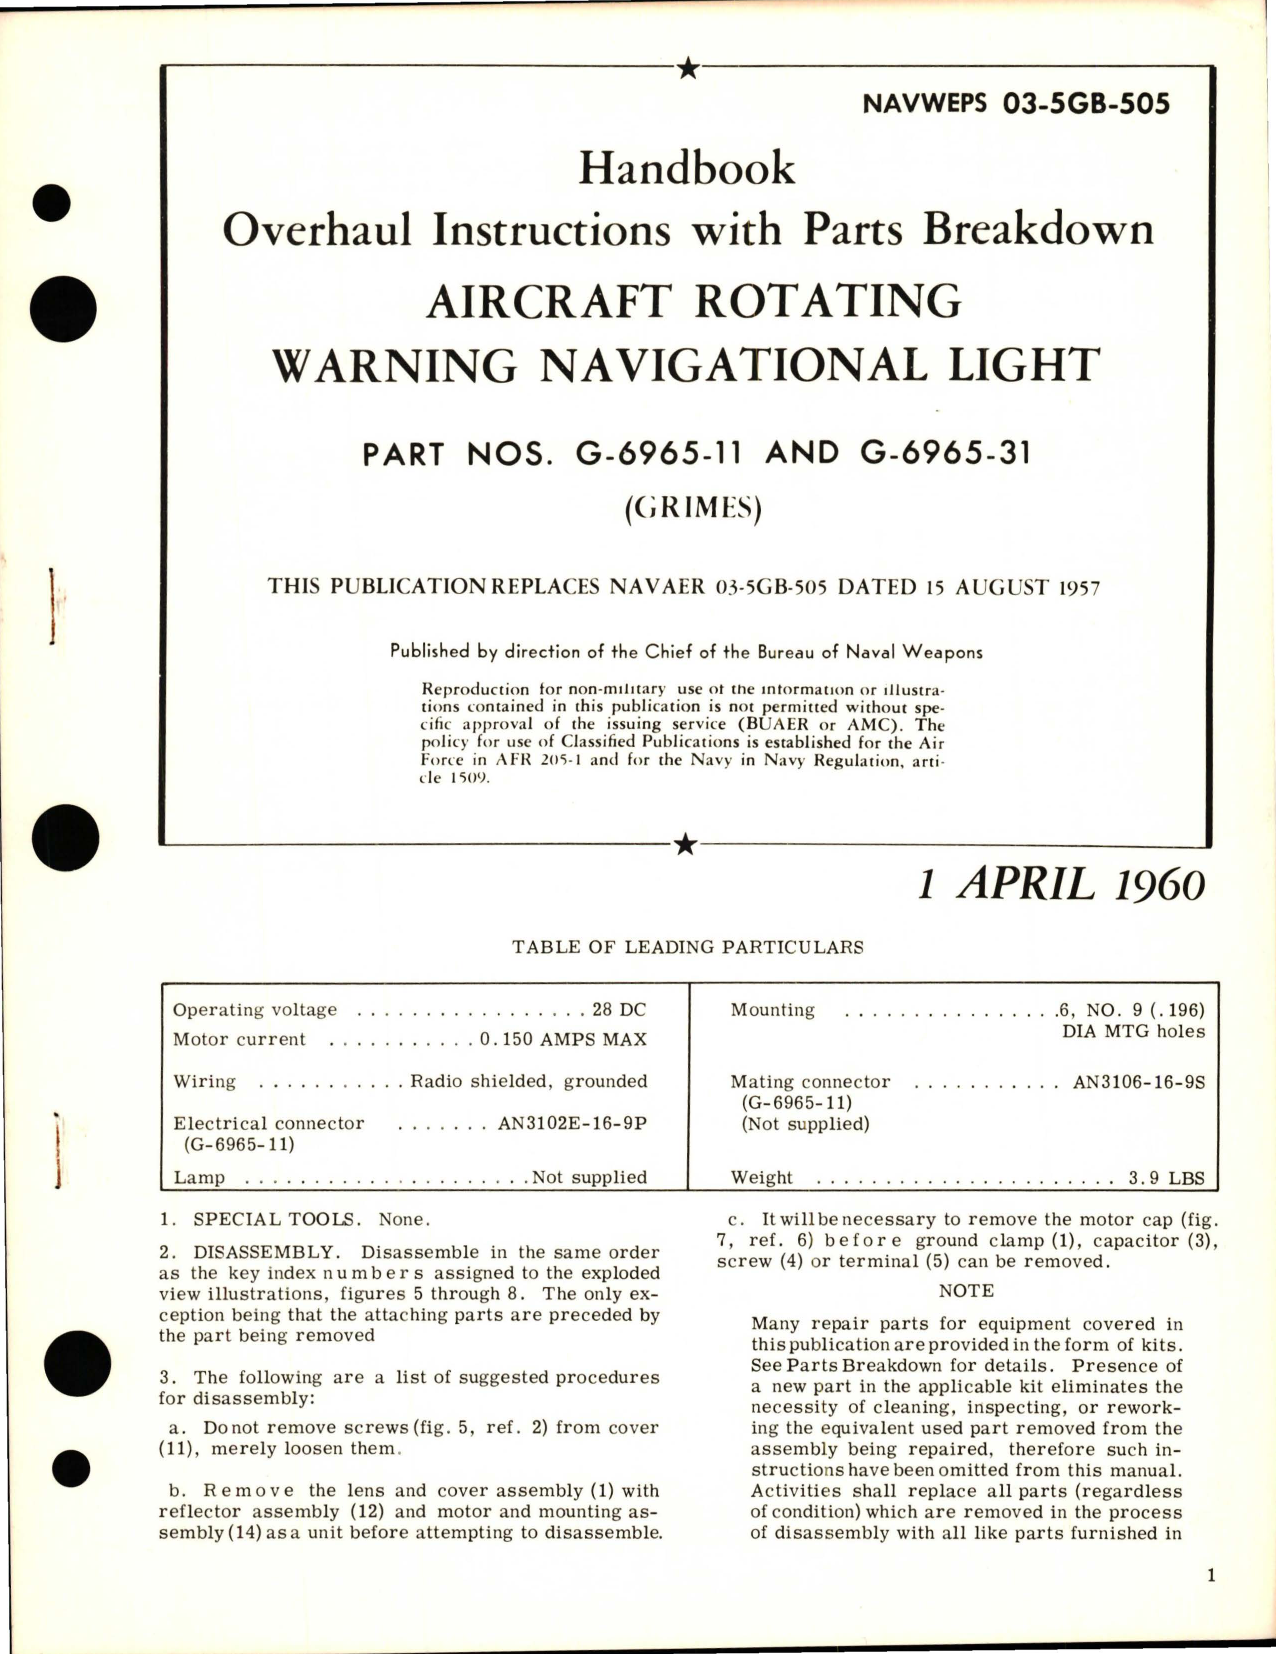 Sample page 1 from AirCorps Library document: Overhaul Instructions with Parts Breakdown for Rotating Warning Navigational Light - Parts G-6965-11 and G-6965-31